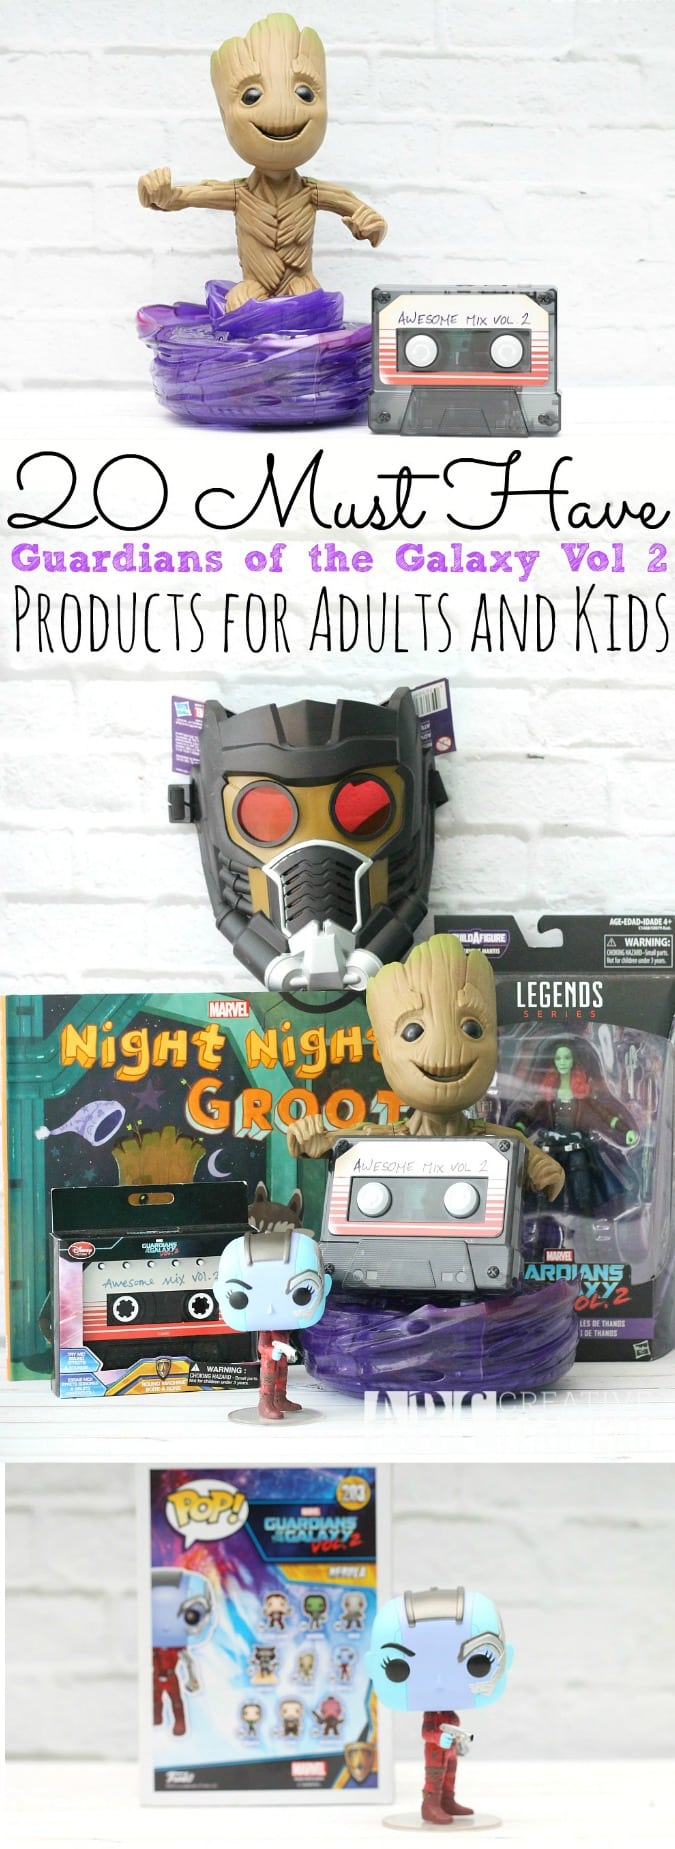 20 Must Have Guardians of the Galaxy Vol 2 Toys and Merchandise